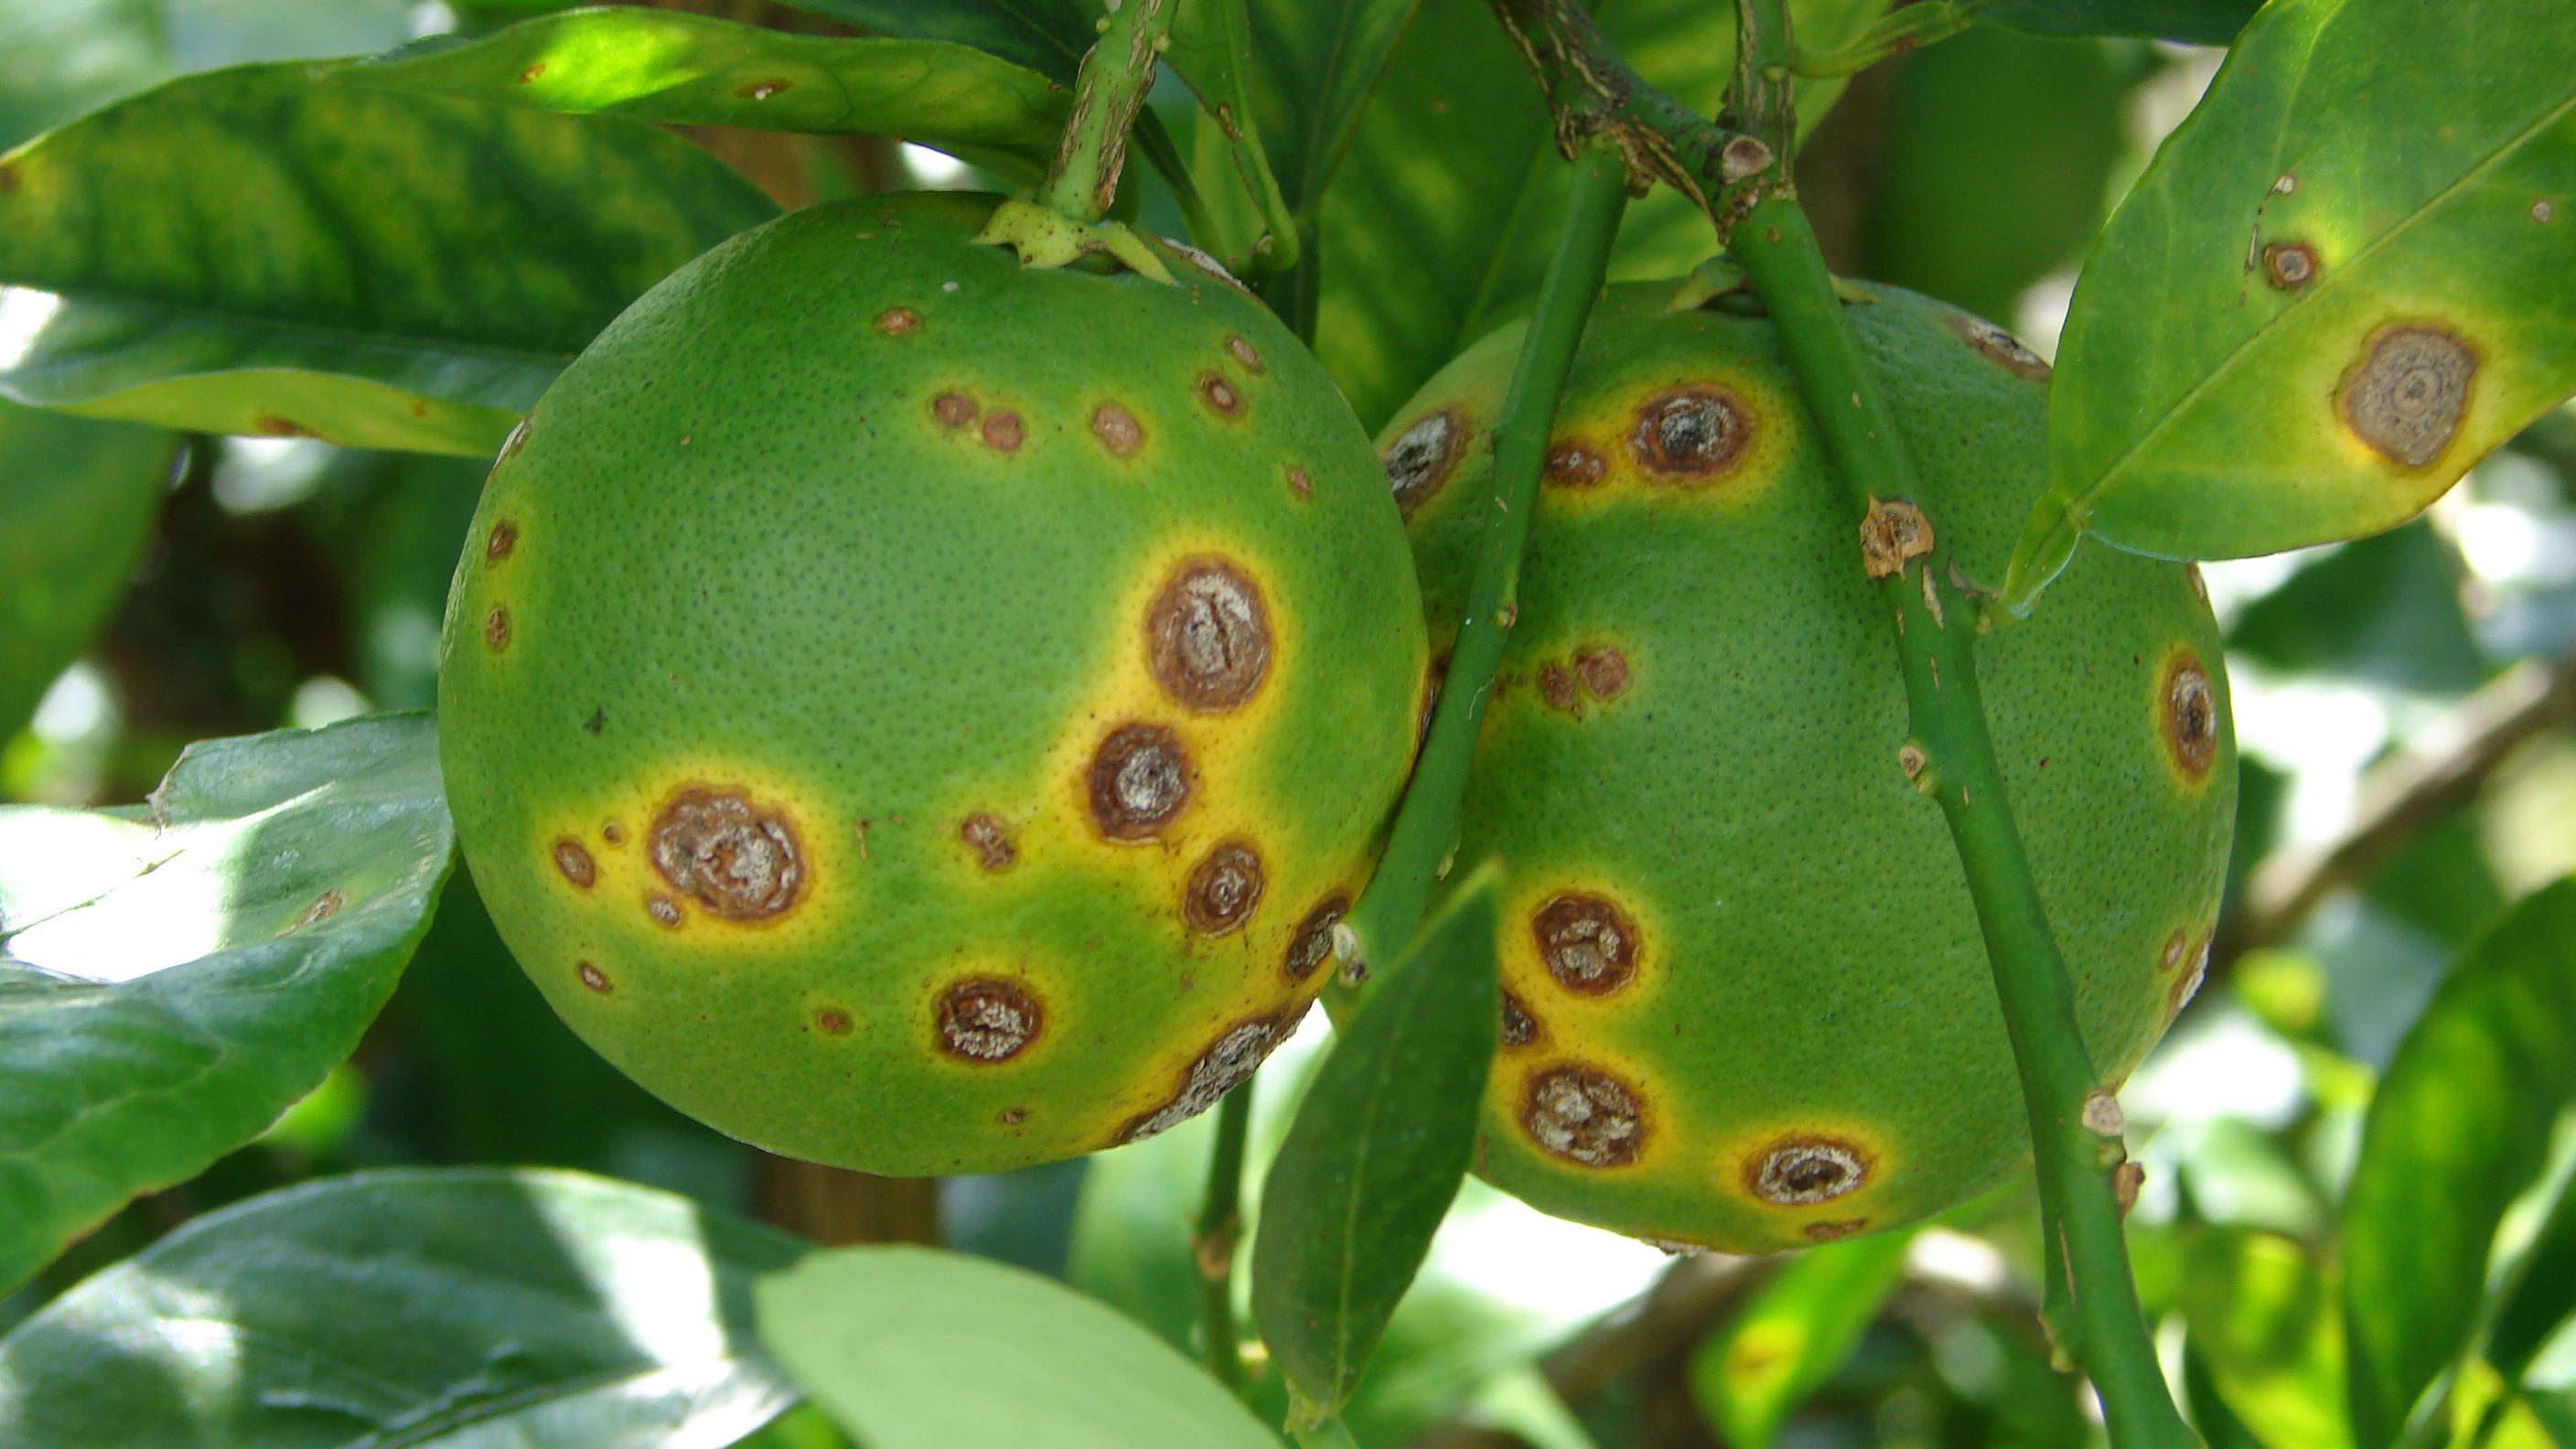 Two green limes with several circular lesions on their surface. The lesions are brown in the center and yellow on the edges.